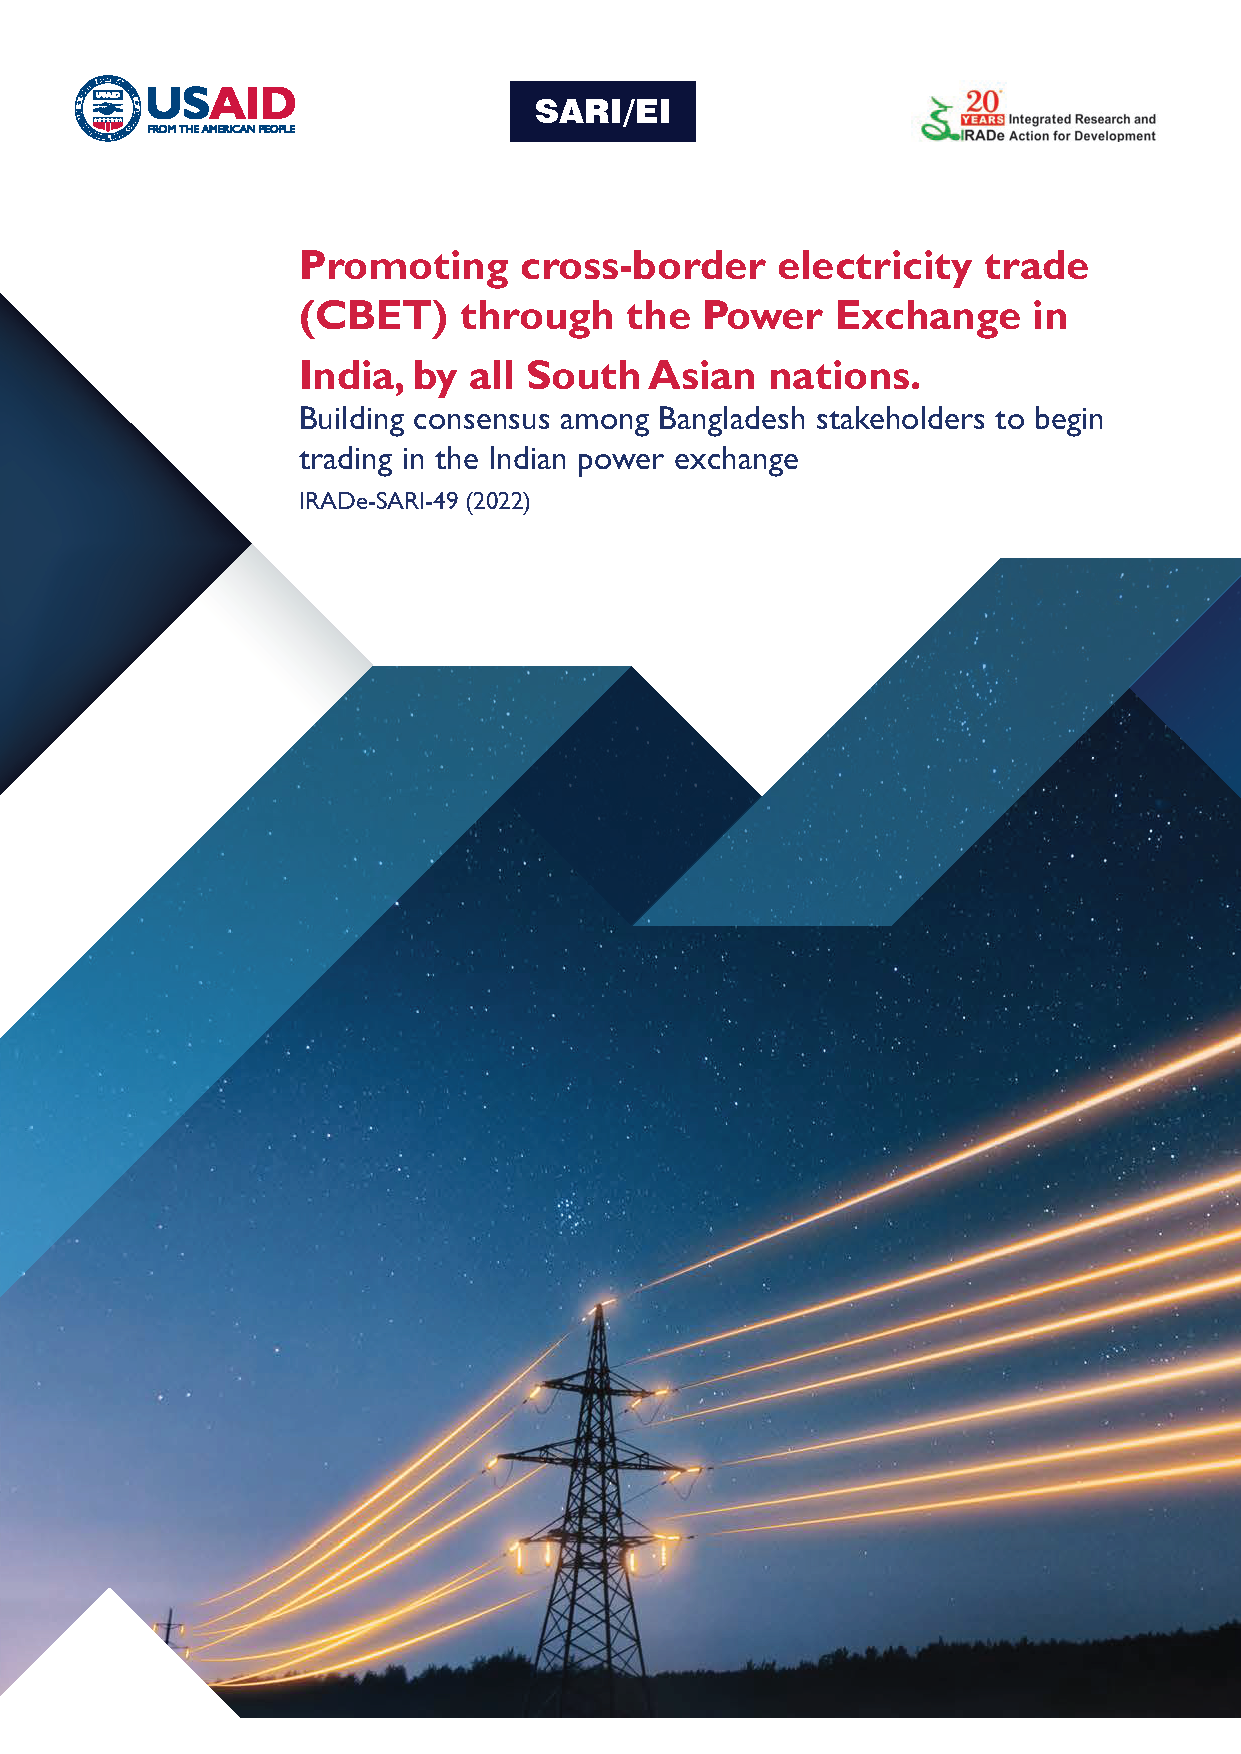 Promoting cross-border electricity trade (CBET) through the Power Exchange in India, by all South Asian nations.